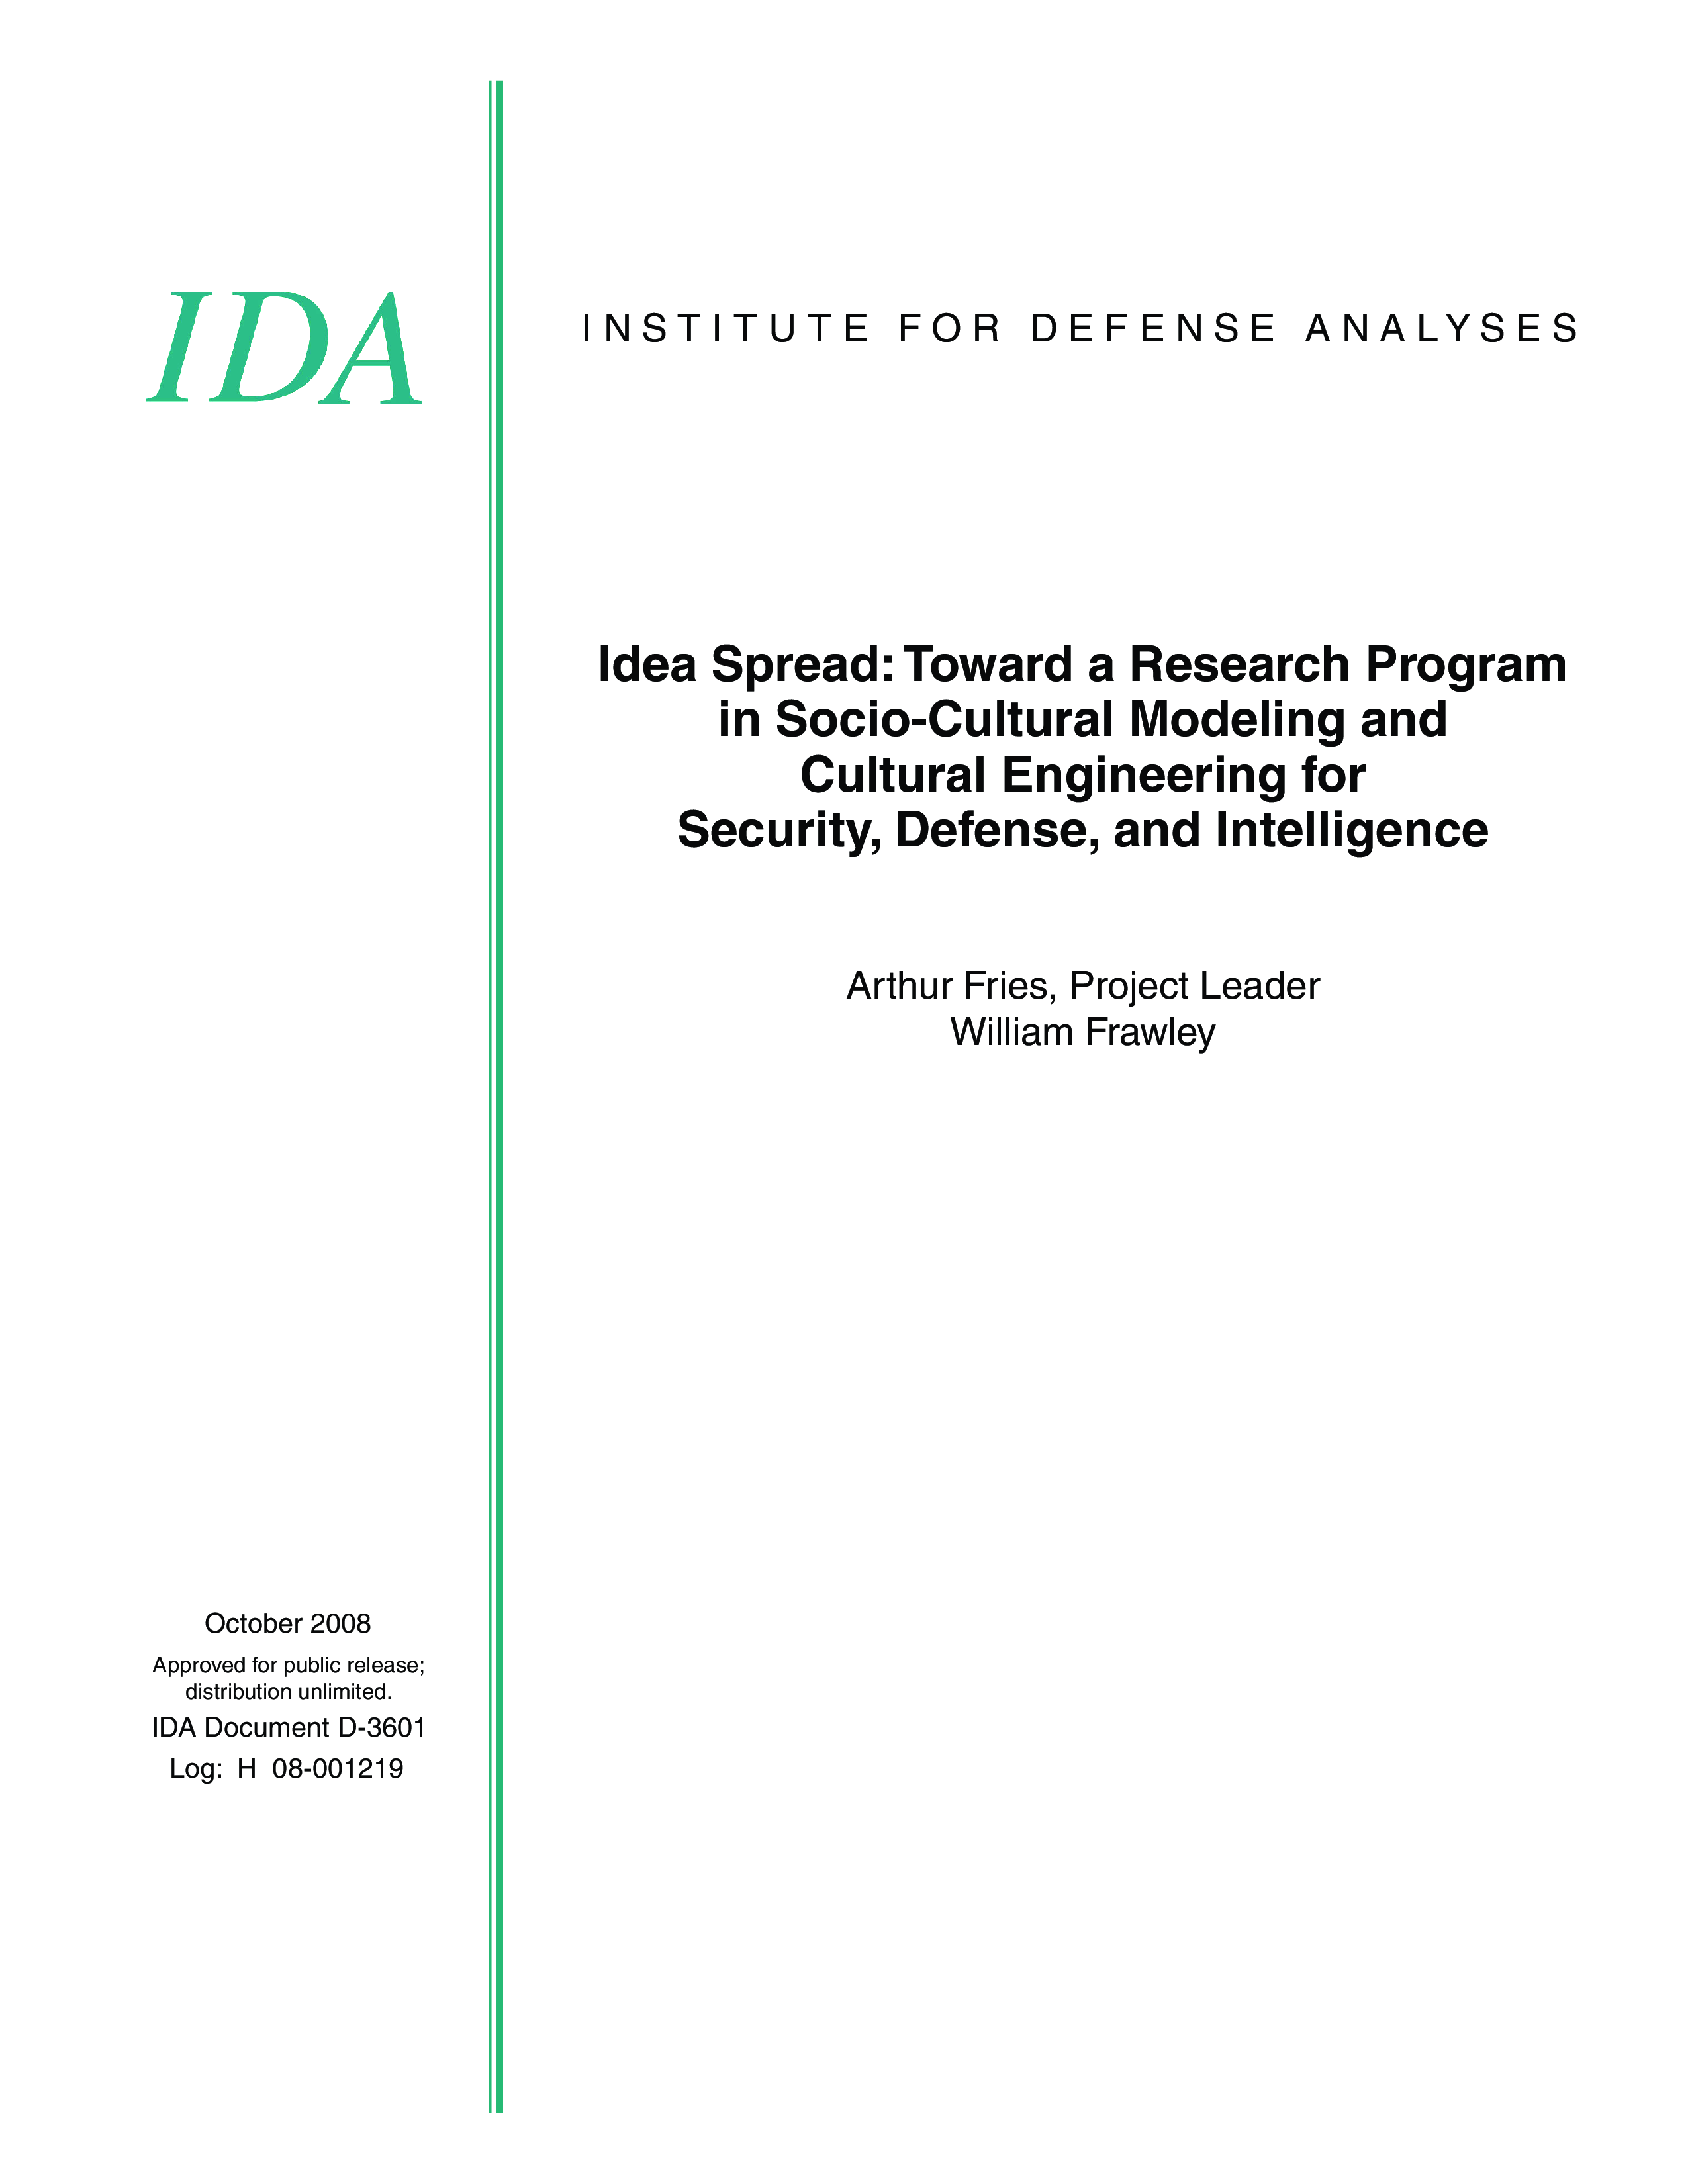 Idea Spread: Toward a Research Program in Socio-Cultural Modeling and Cultural Engineering for Security, Defense, and Intelligence